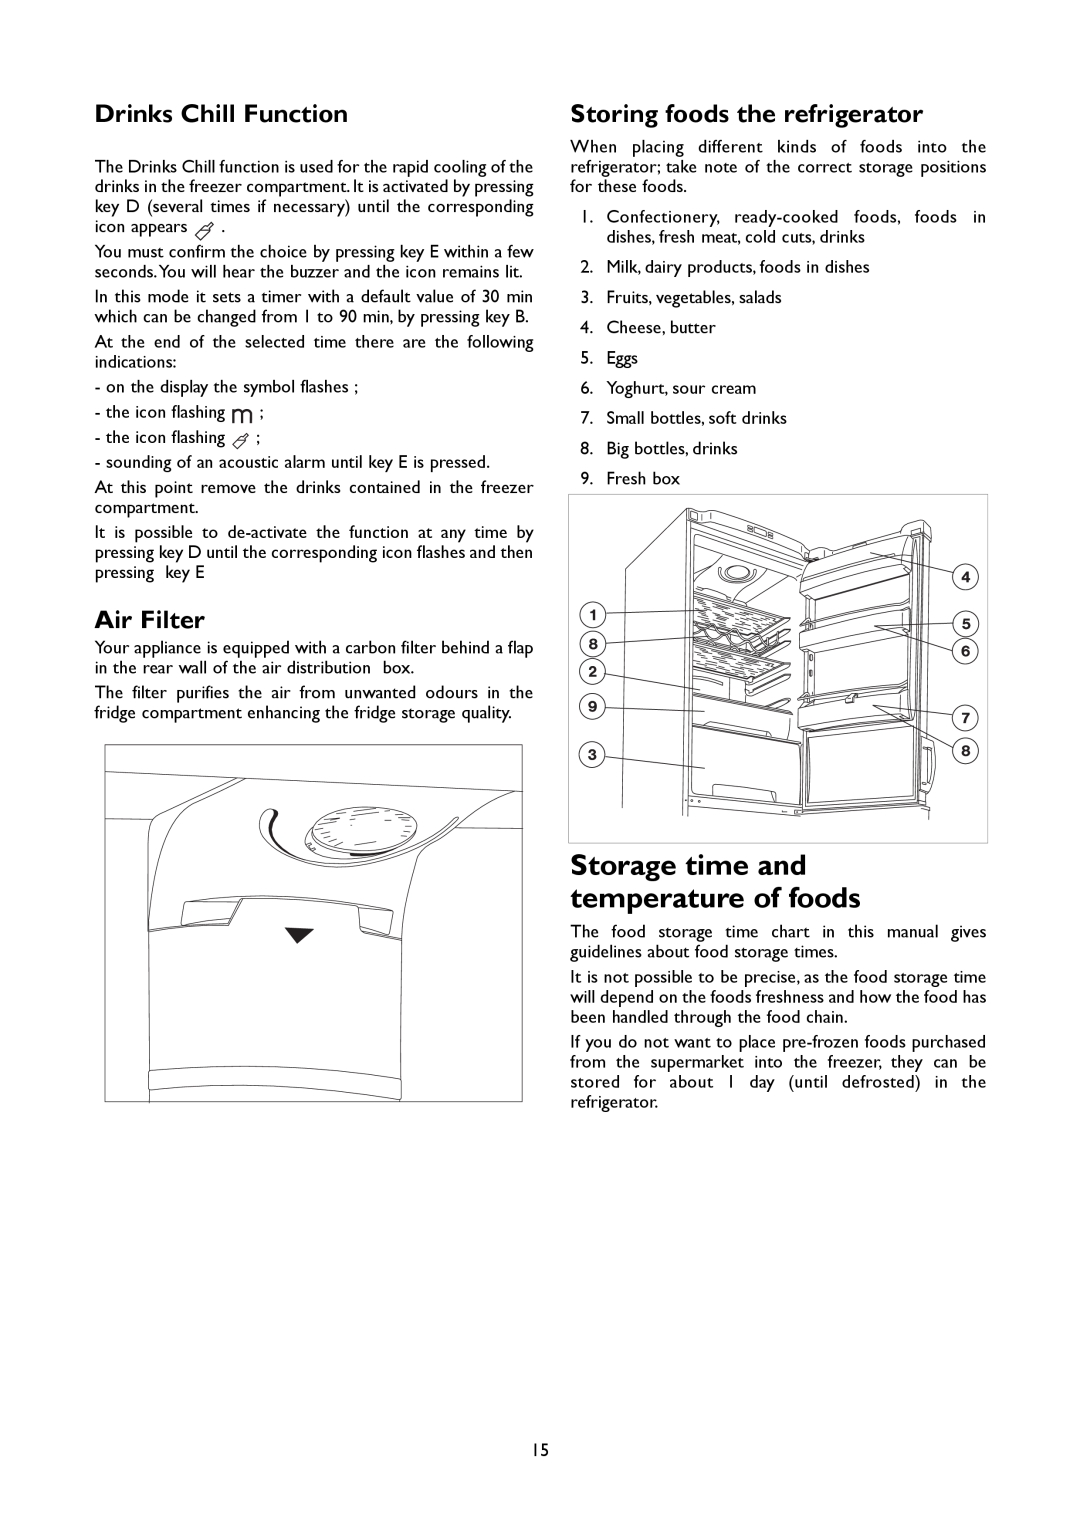 John Lewis JLFFW2005 instruction manual Storage time and temperature of foods, Drinks Chill Function, Air Filter 